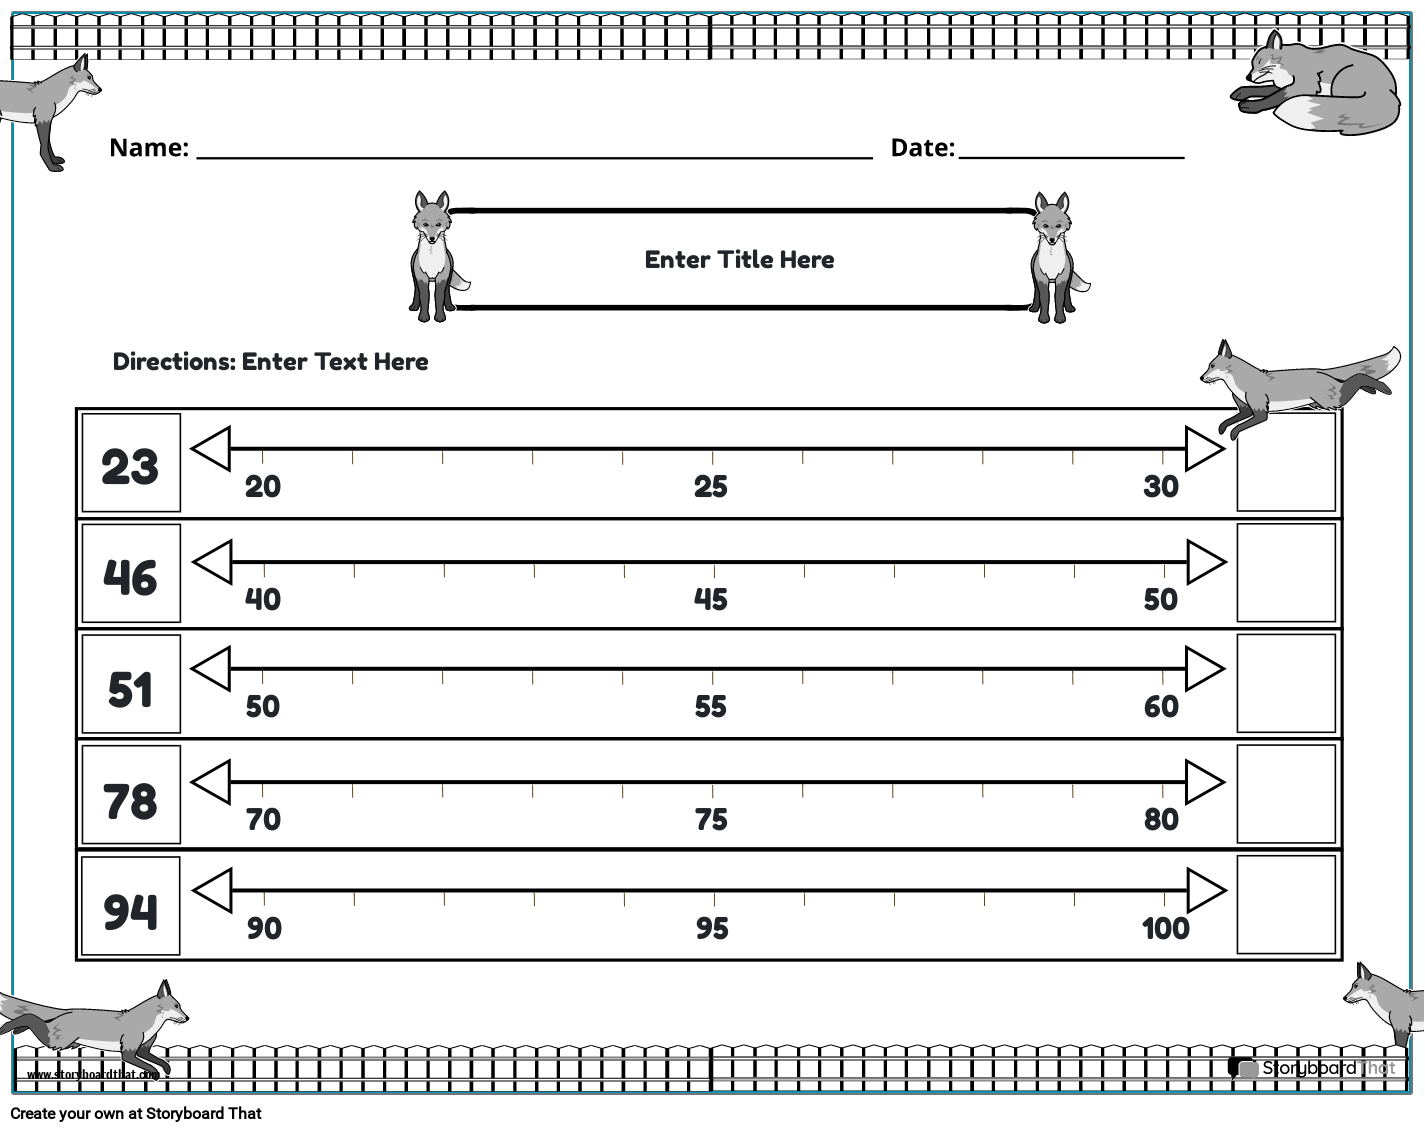 Rounding numbers worksheet with fox B&W